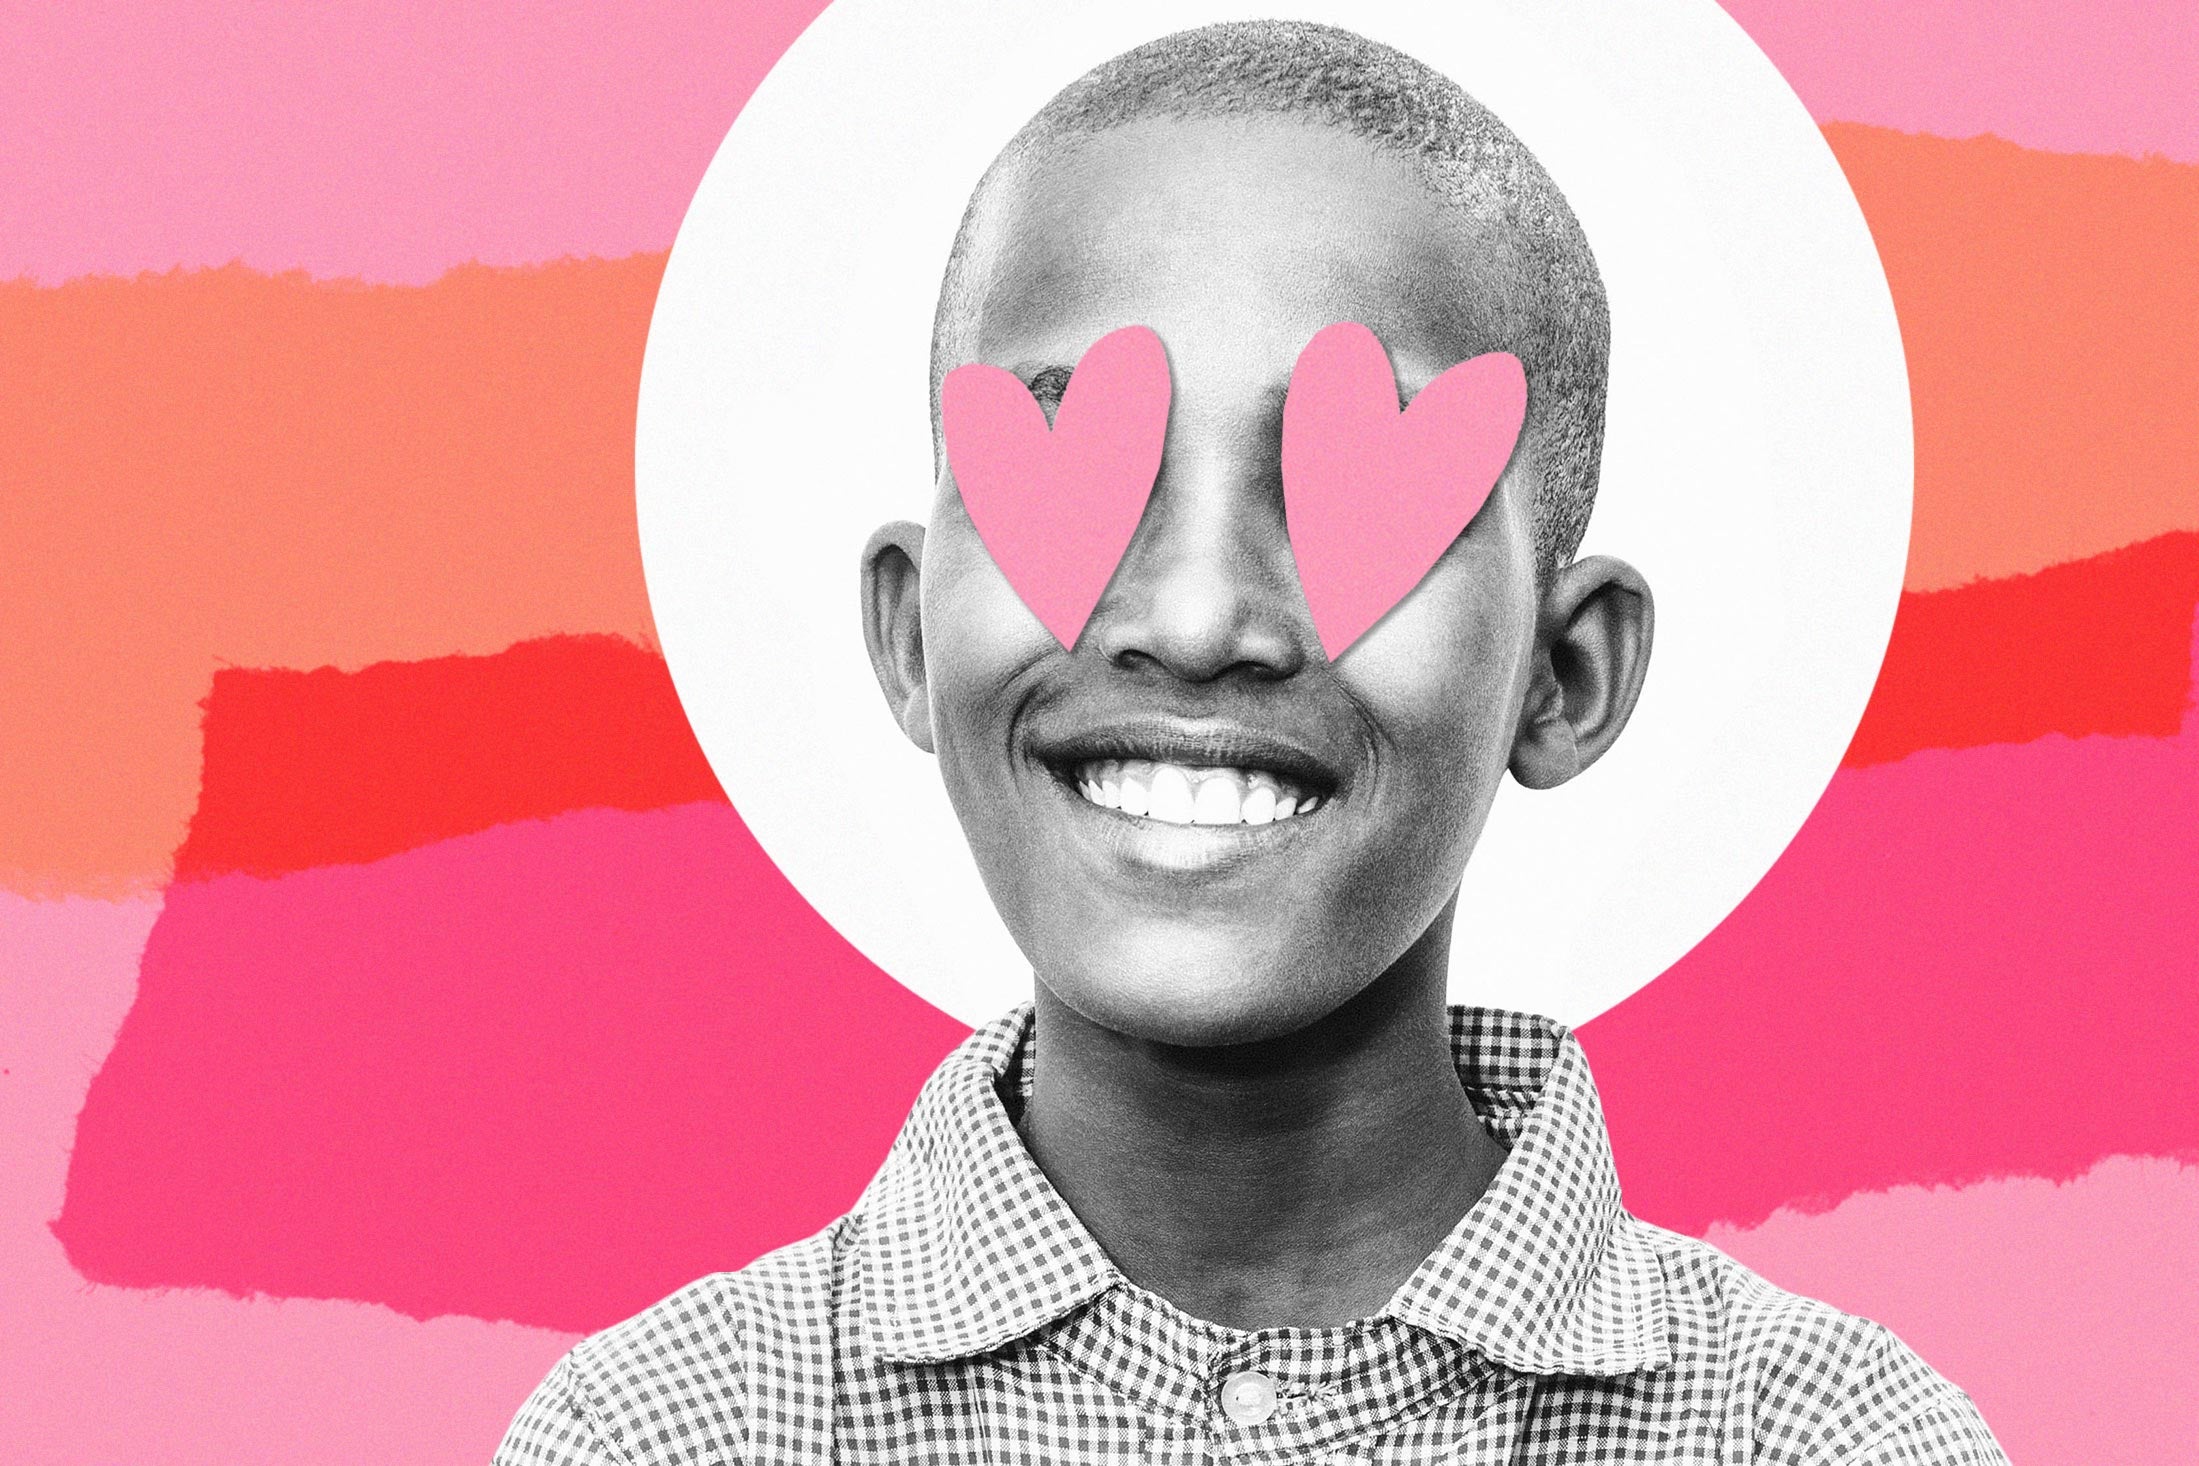 13 year old boy with hearts over his eyes, photo collage.